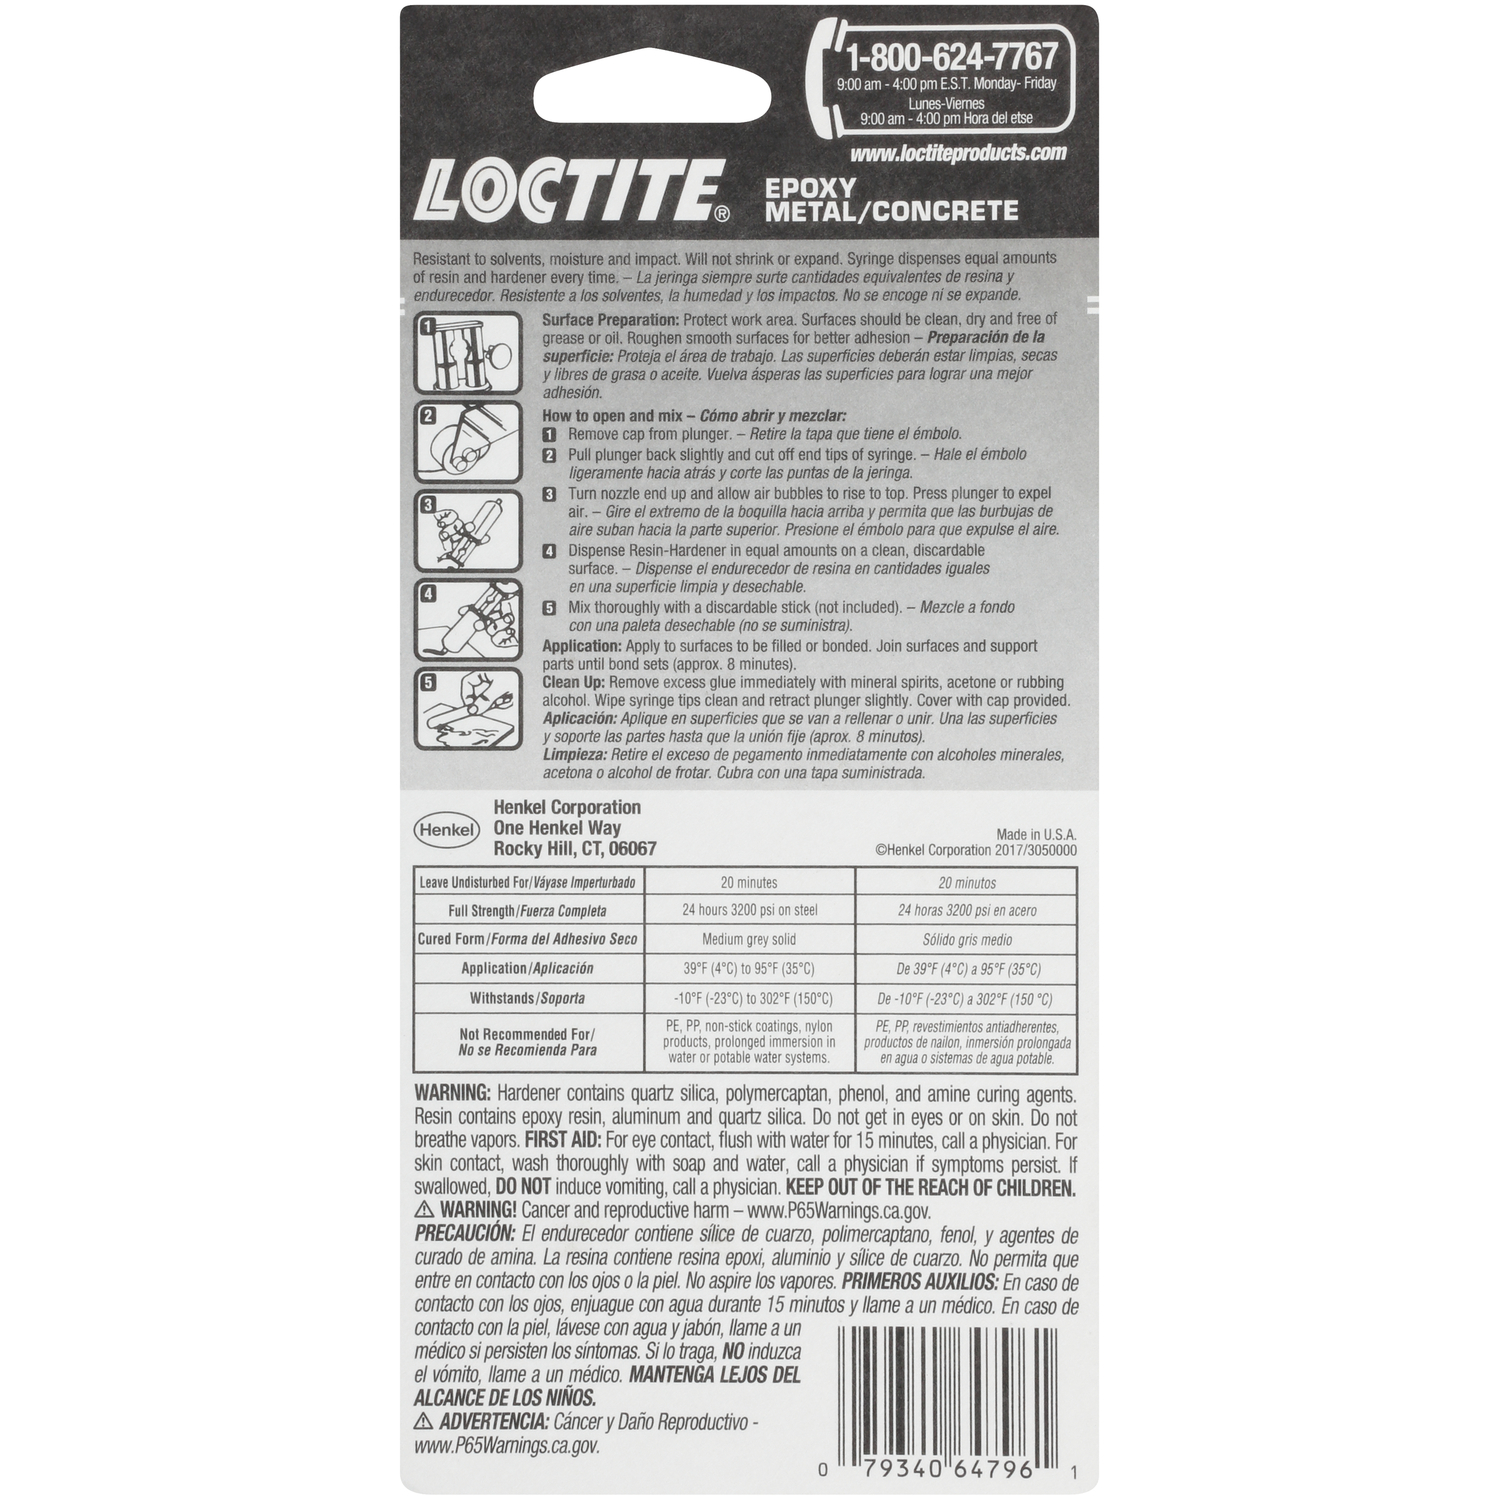 Loctite Footswitch Switch 97201 Price is per Each Loctite Number: 88653 79340972018